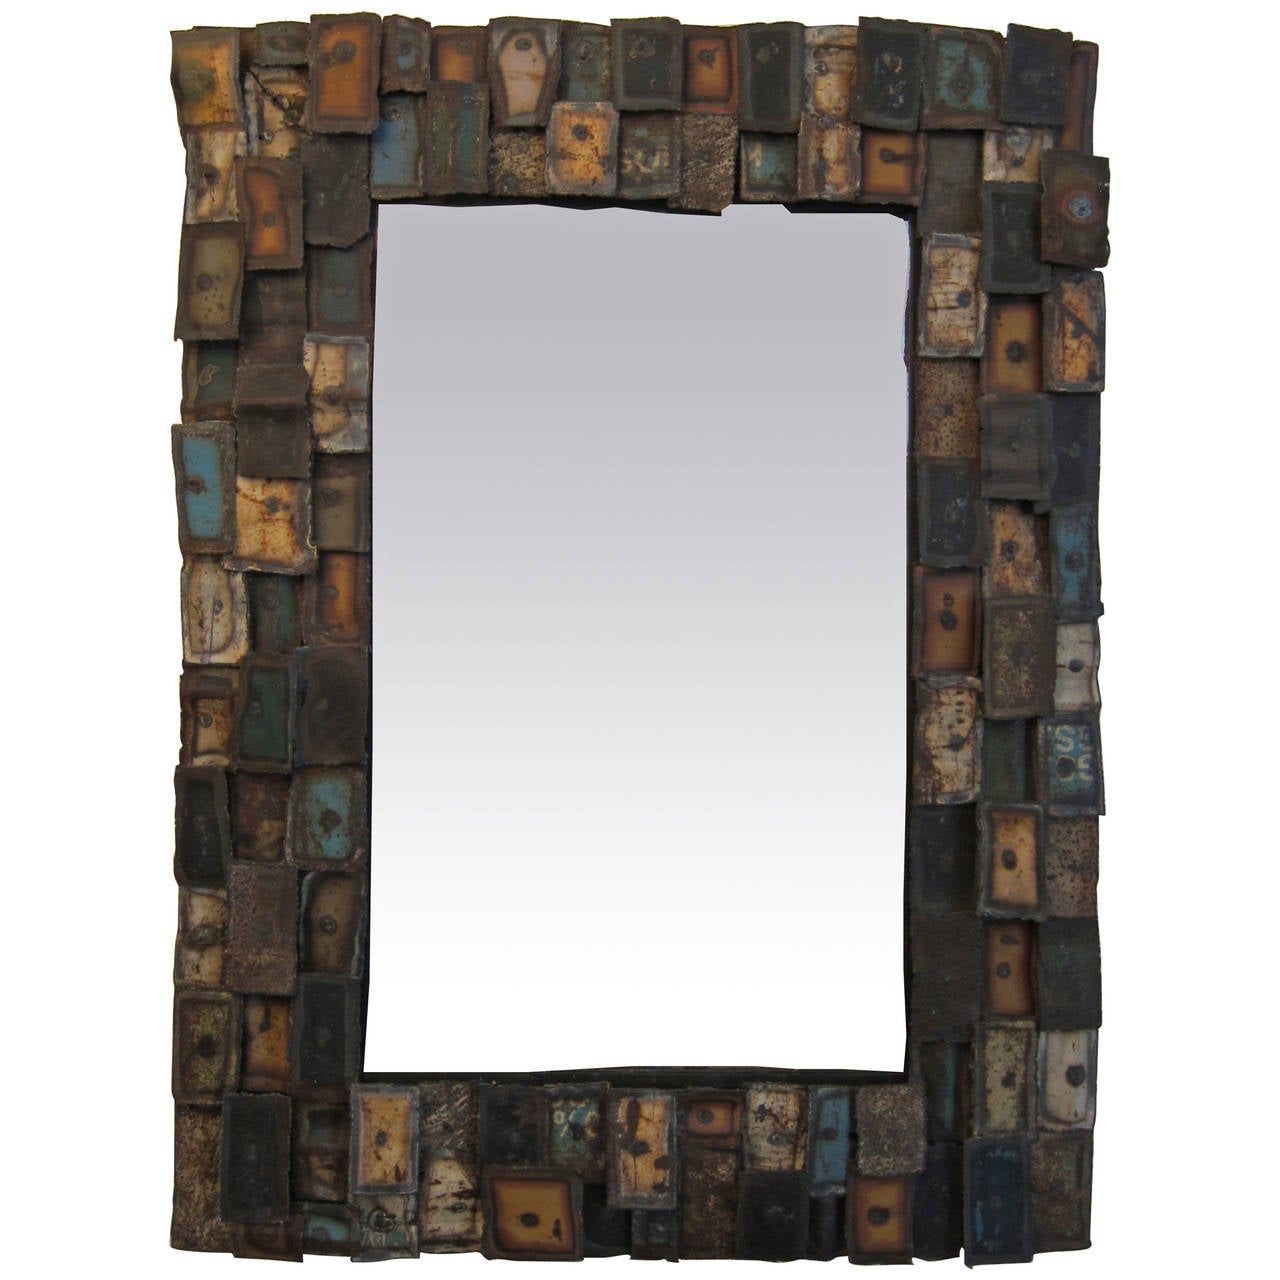 Torch Cut Patchwork Metal Wall Mirror At 1stdibs Pertaining To Silver Metal Cut Edge Wall Mirrors (View 12 of 15)